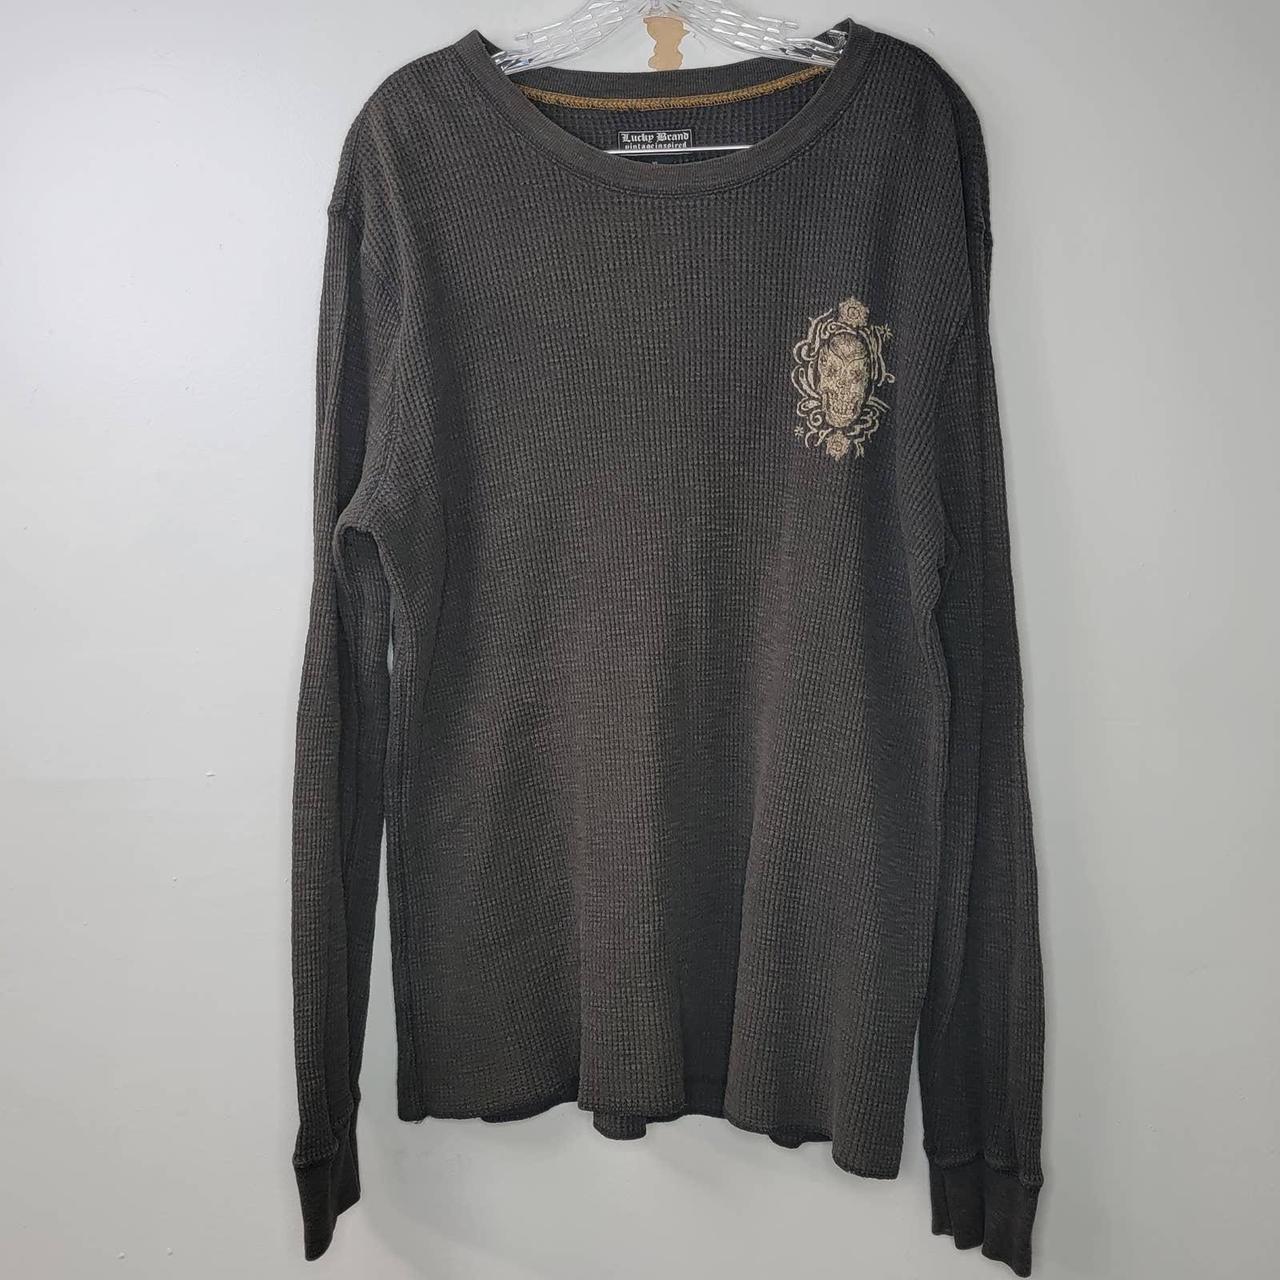 Lucky Brand Men’s Brown Waffle Knit Thermal Skull... - Depop